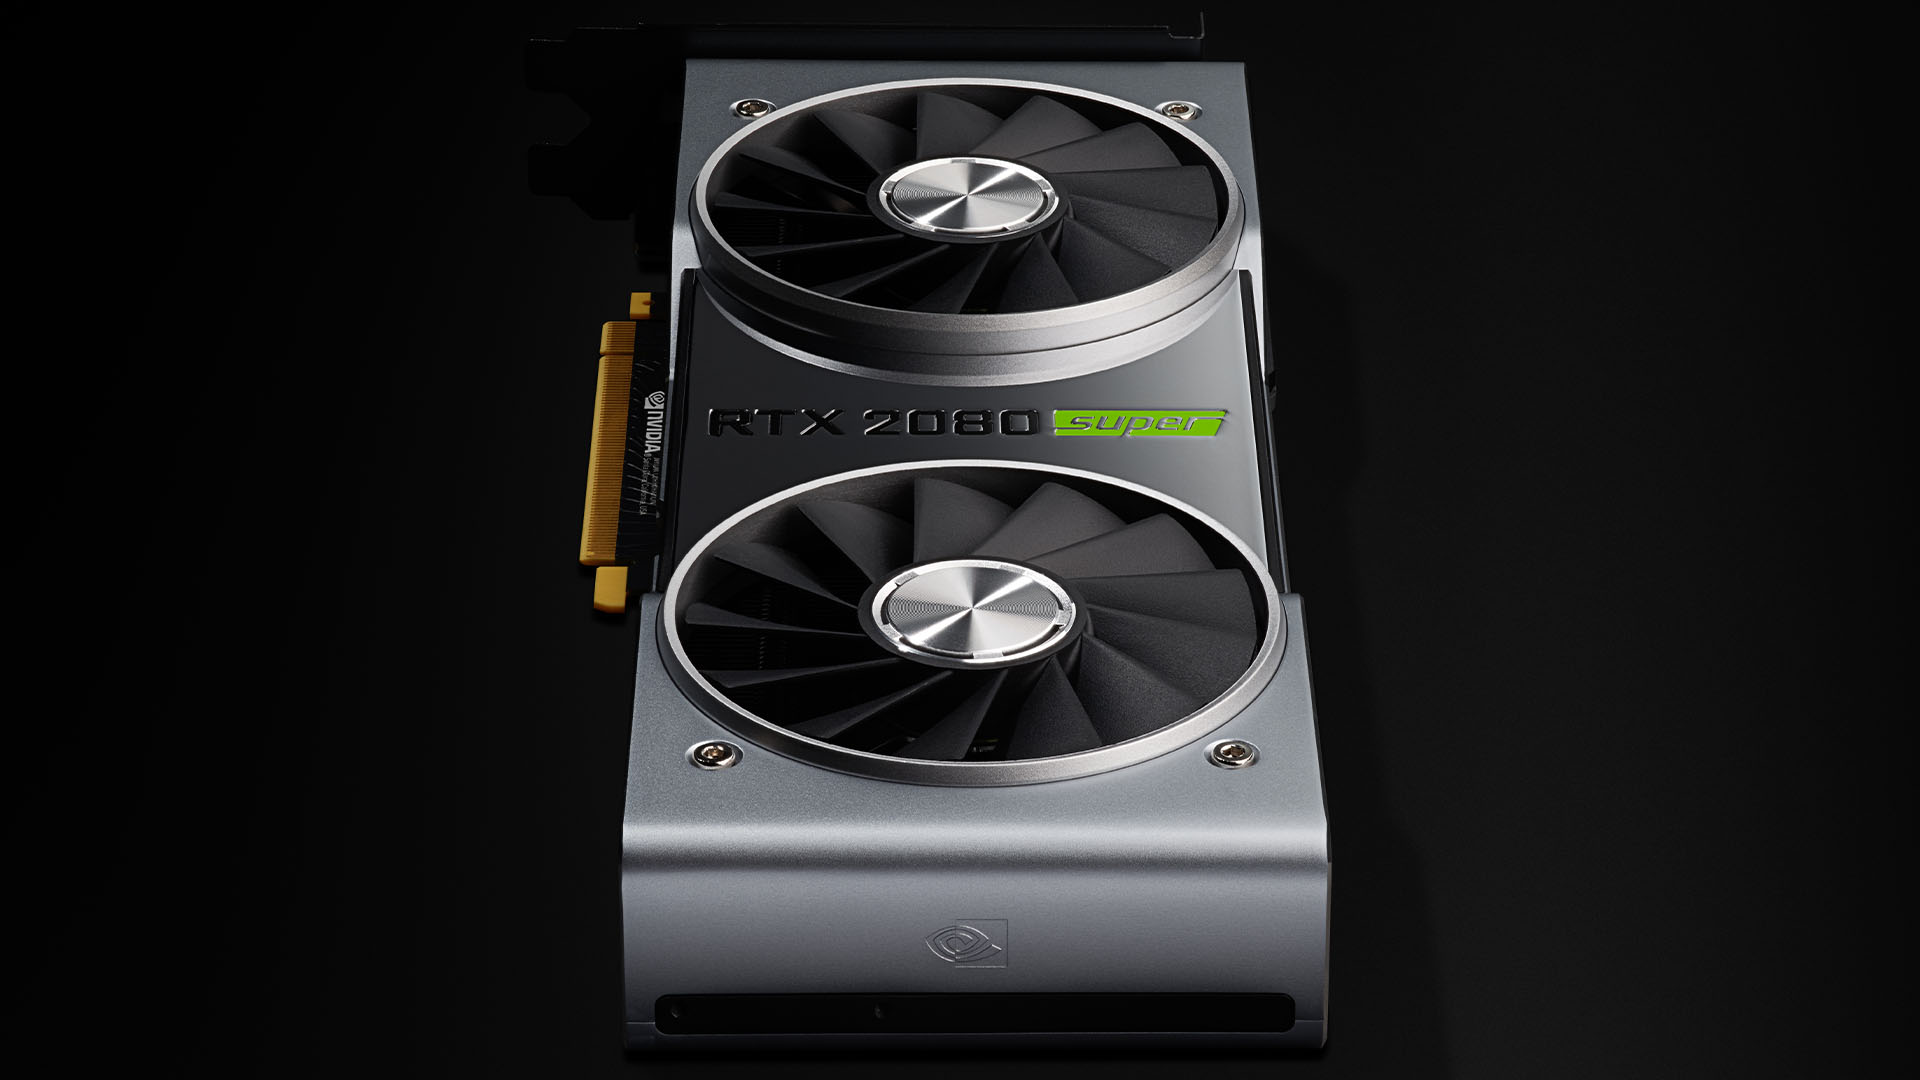 Nvidia GeForce RTX 2080 Super review 02